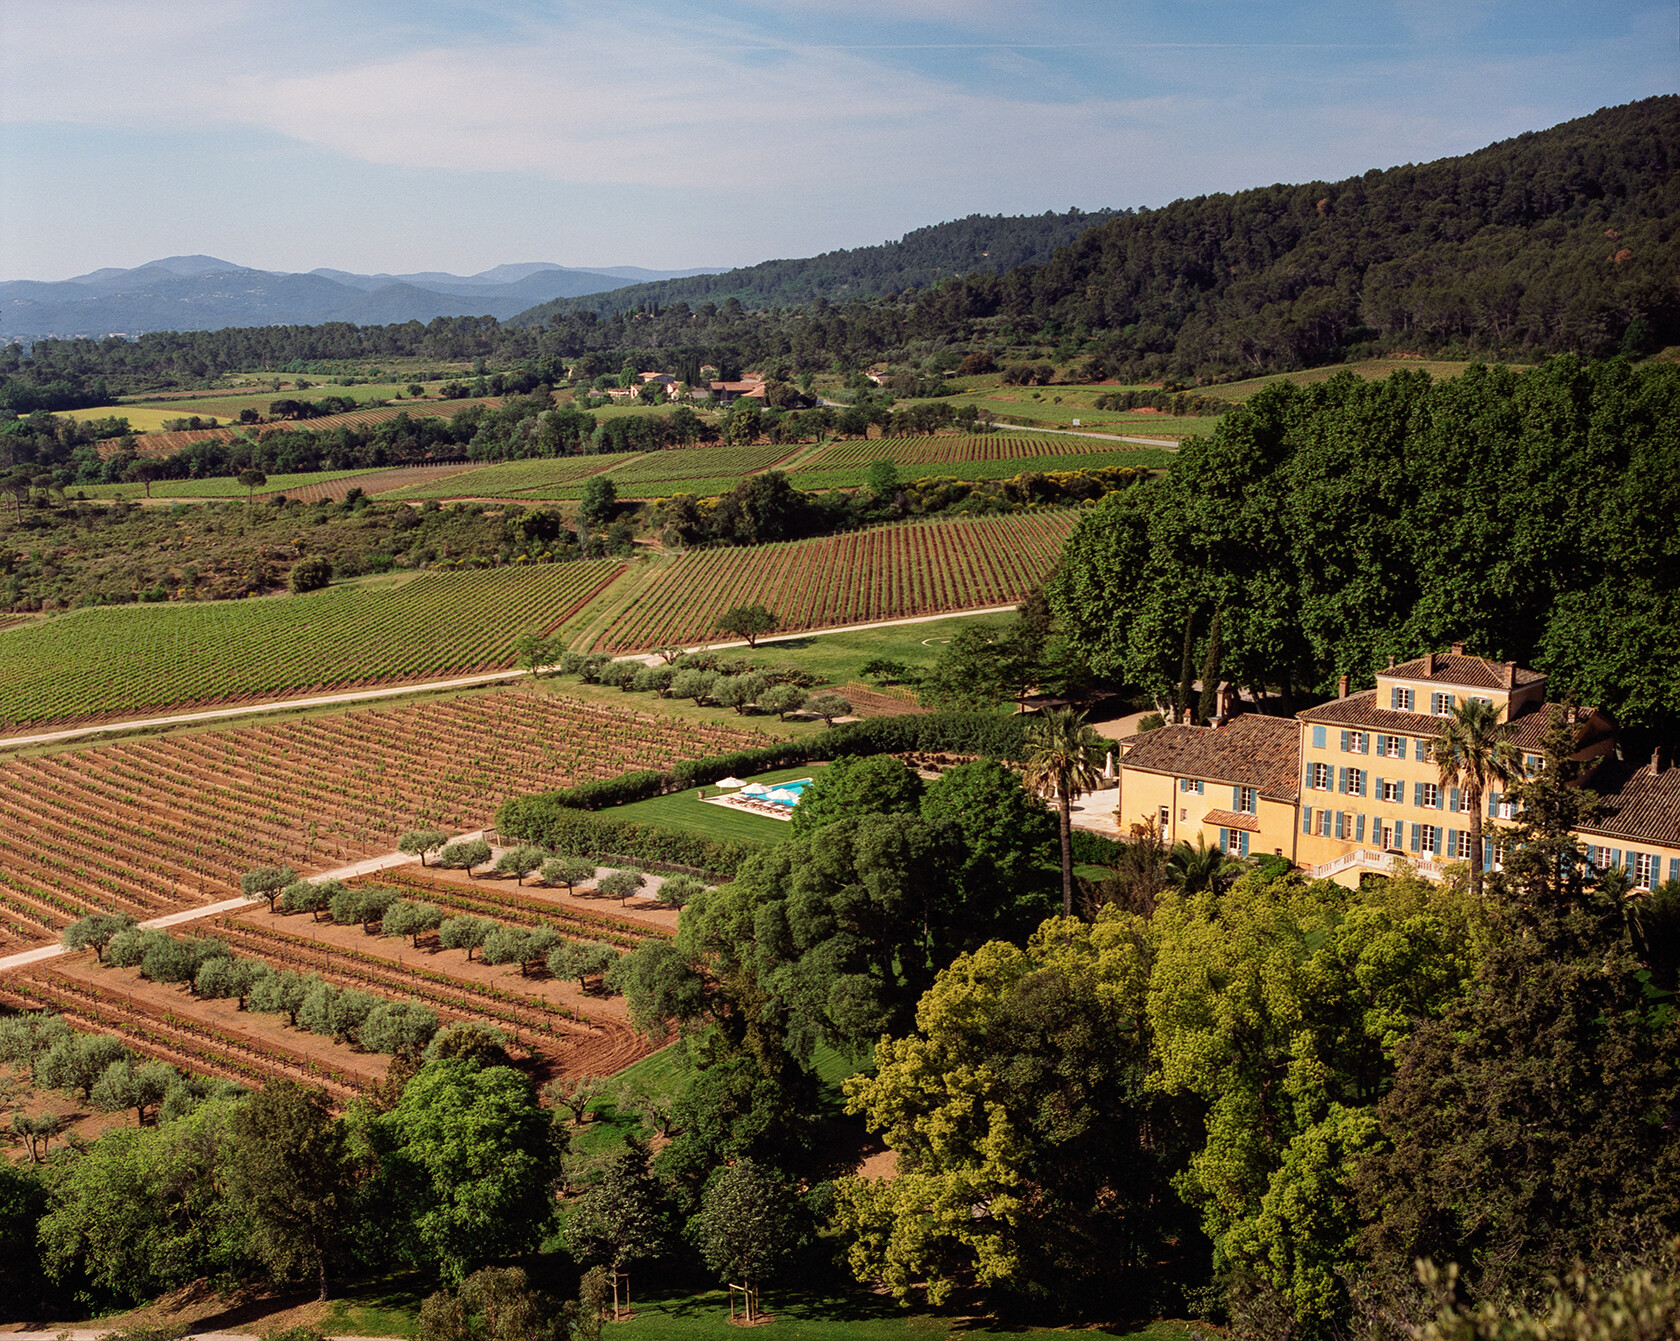 Spring time at the Esclans estate in Provence.